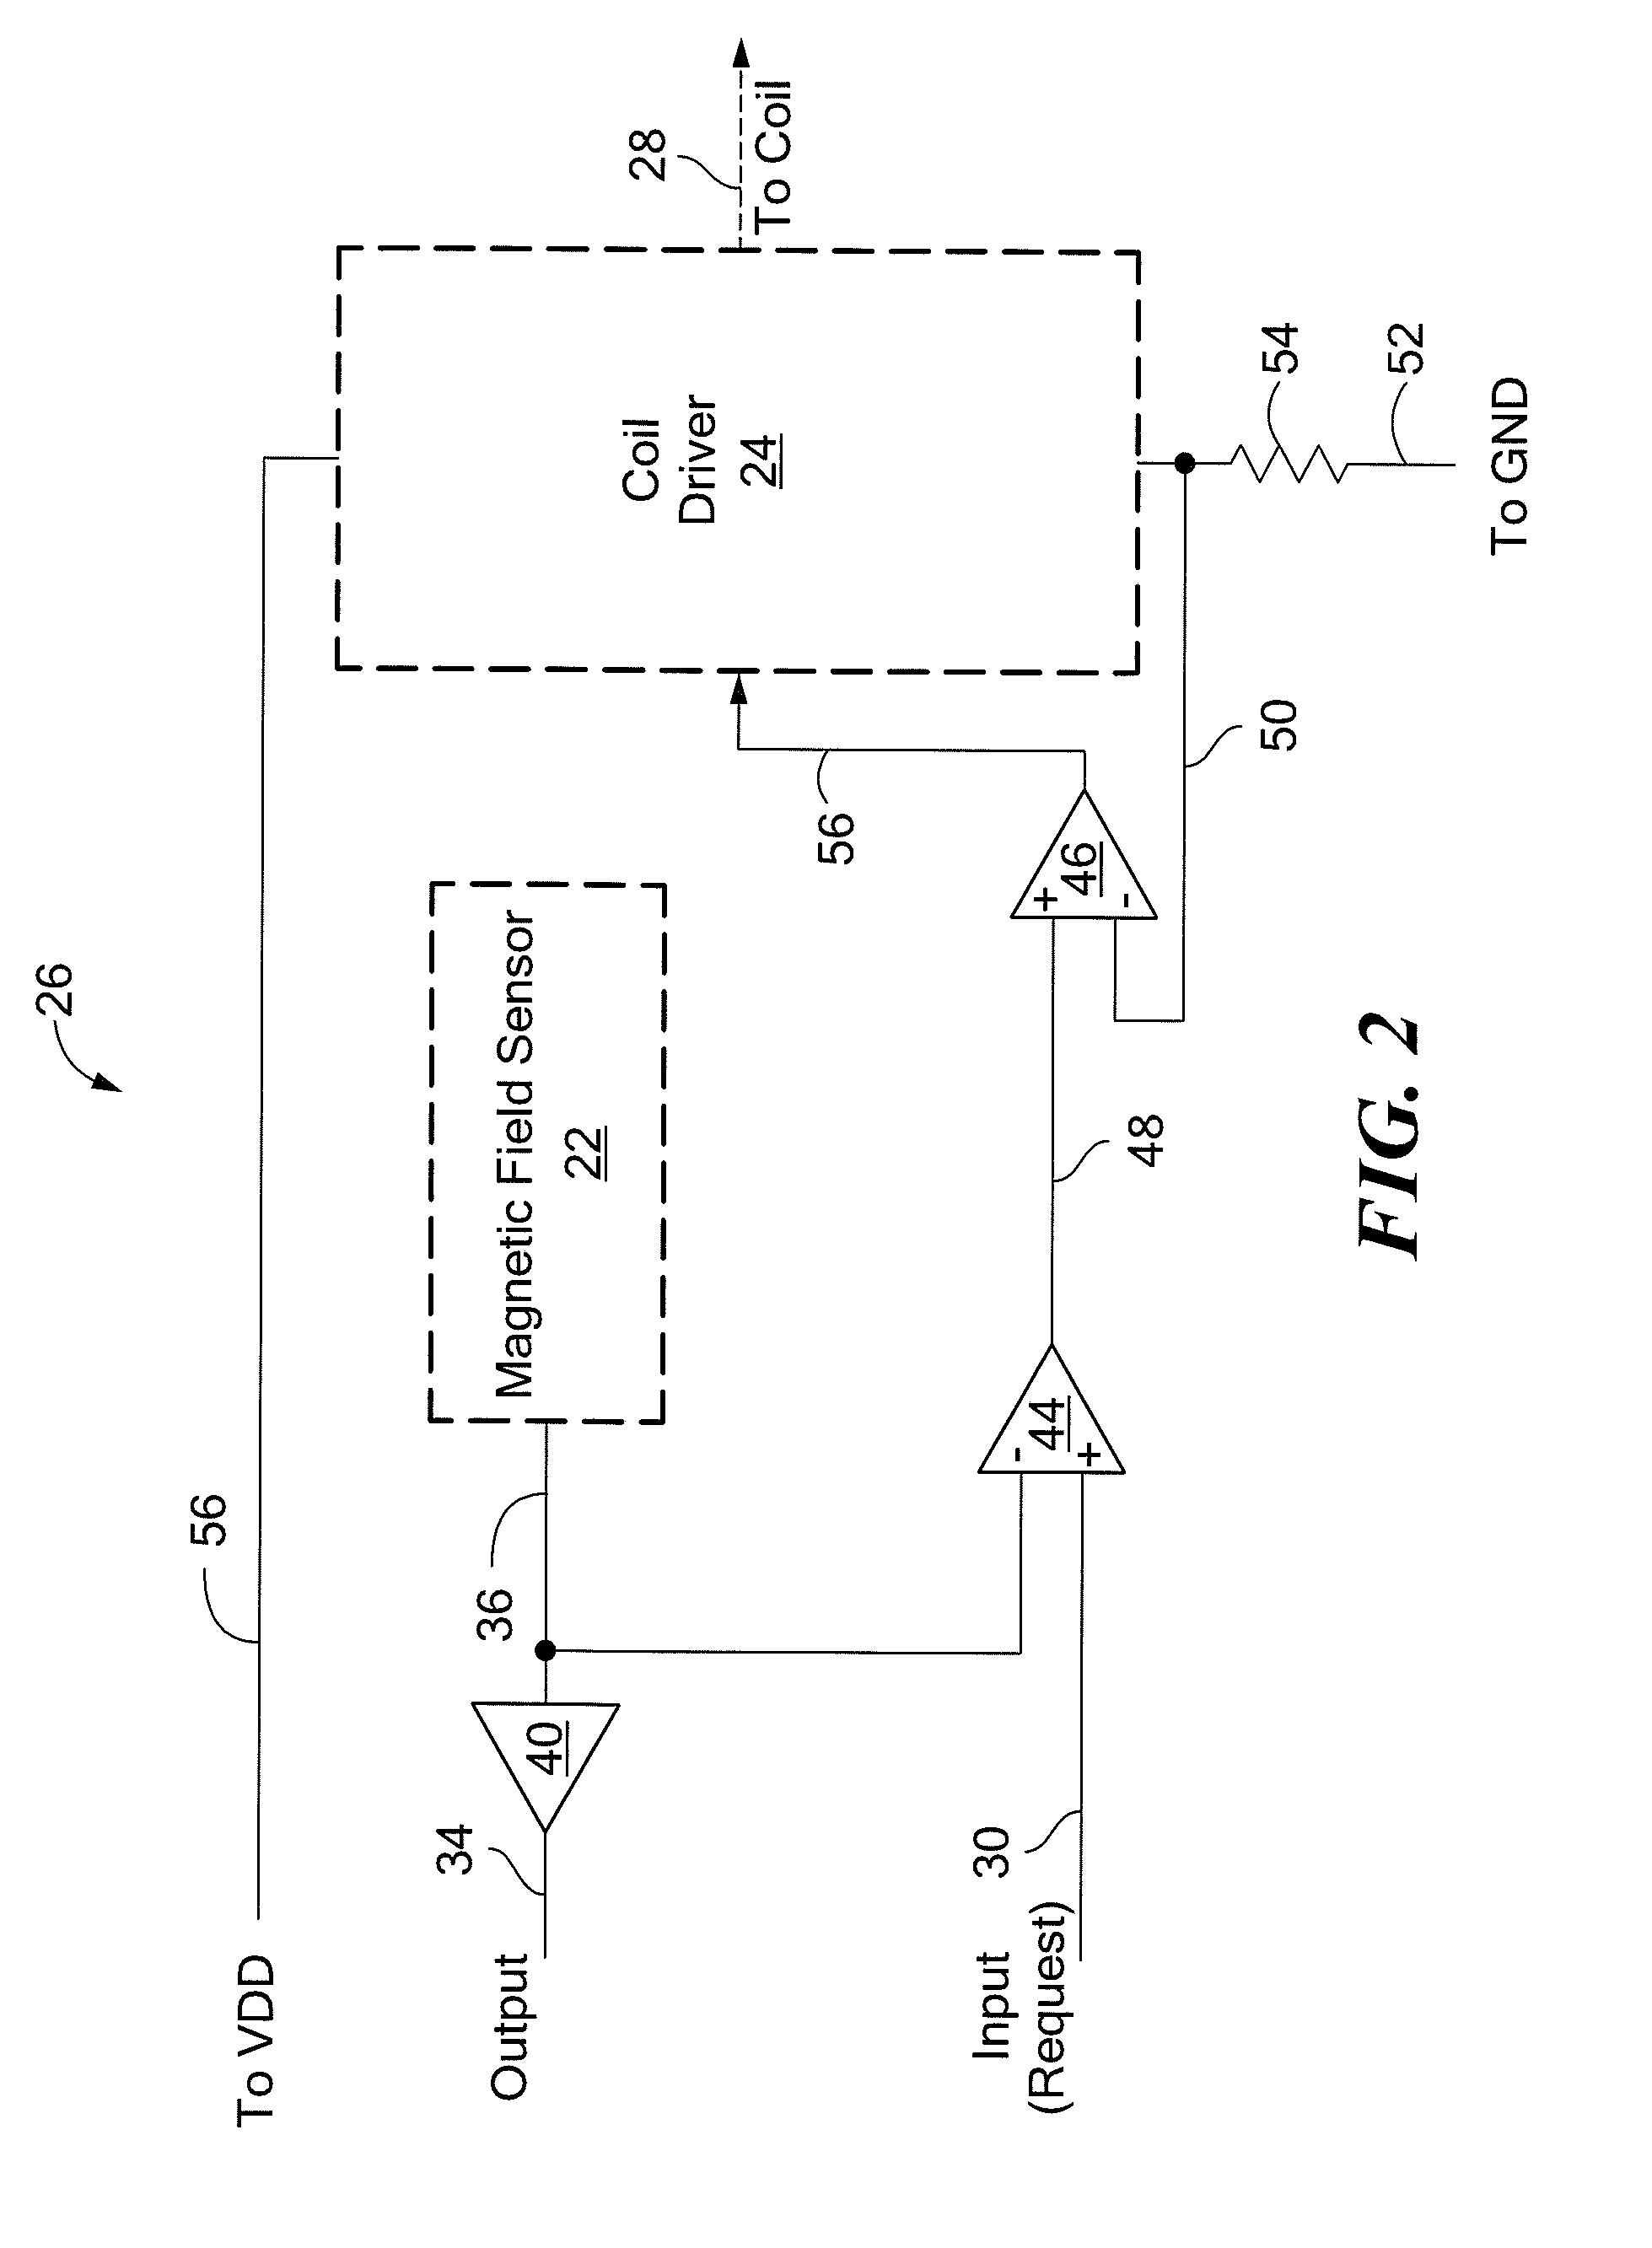 Hall-effect based linear motor controller